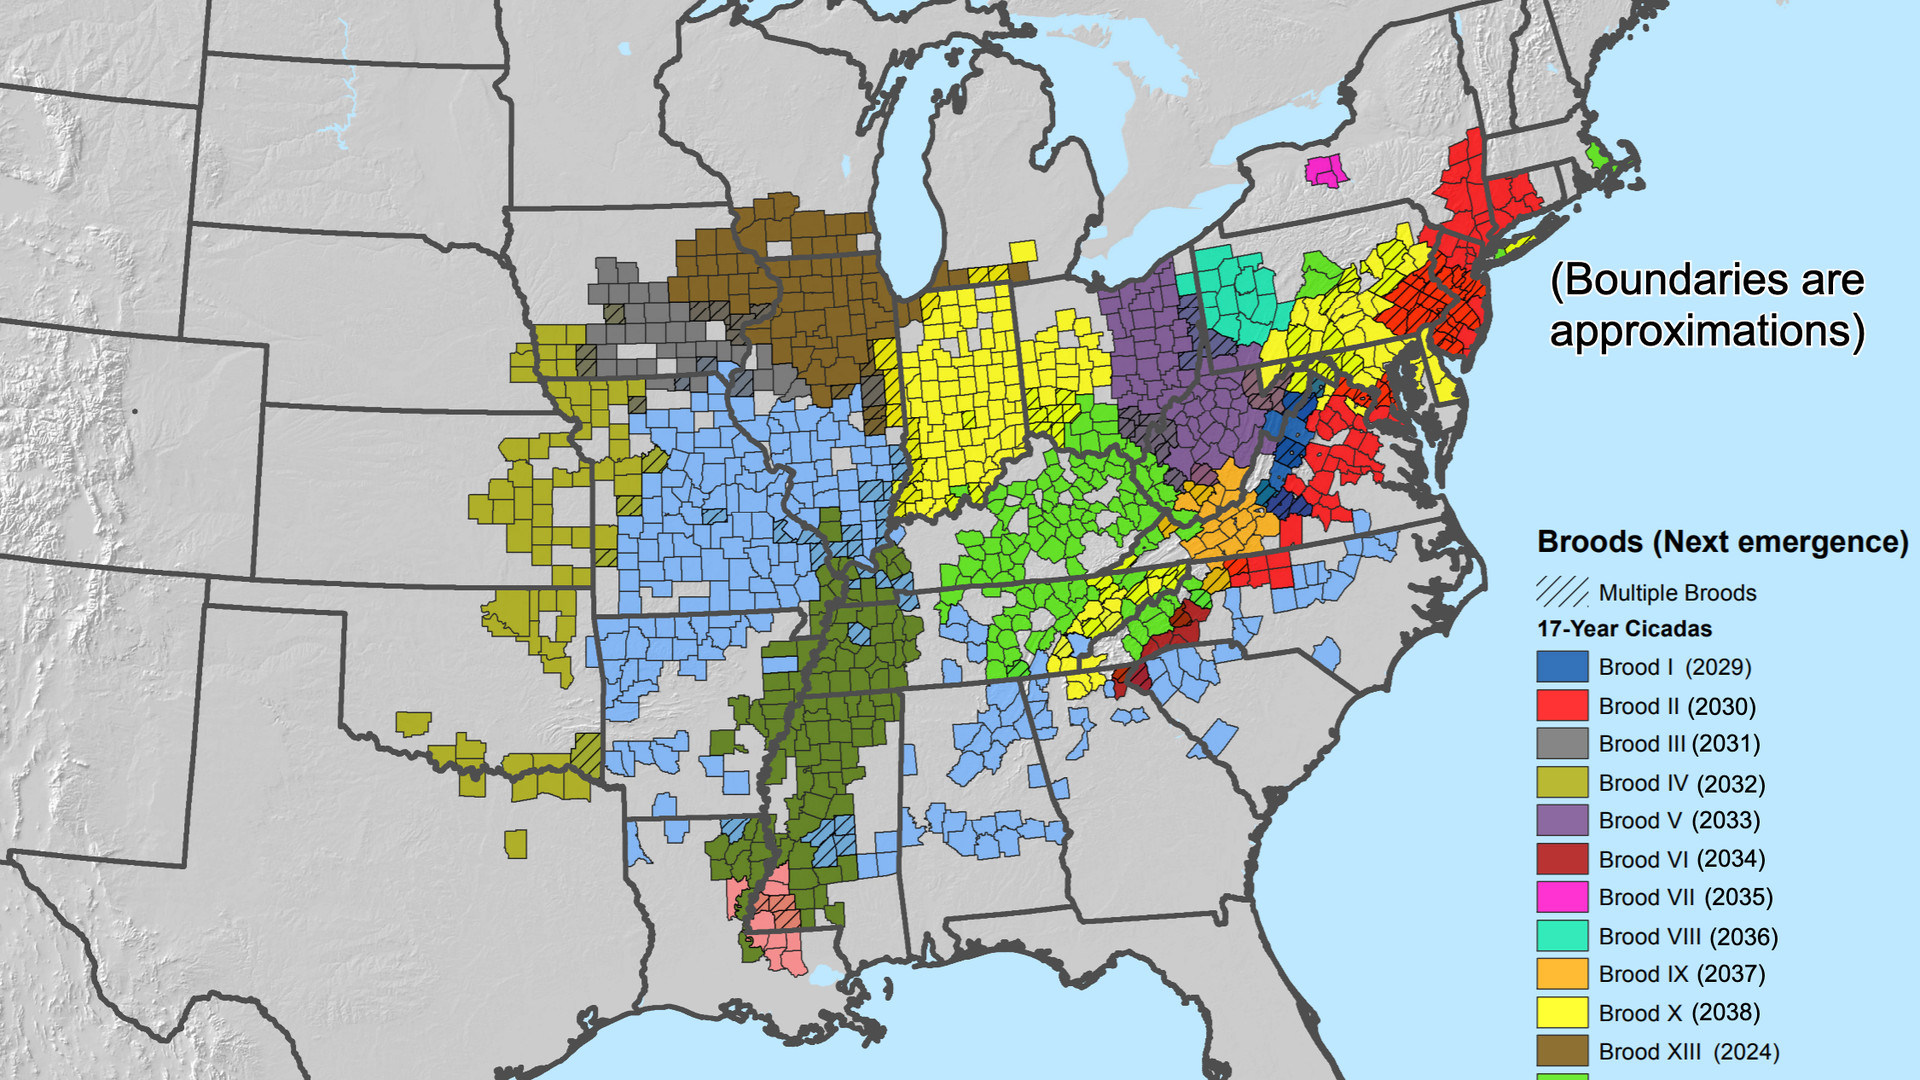 Where billions of cicadas will emerge this spring (and over the next